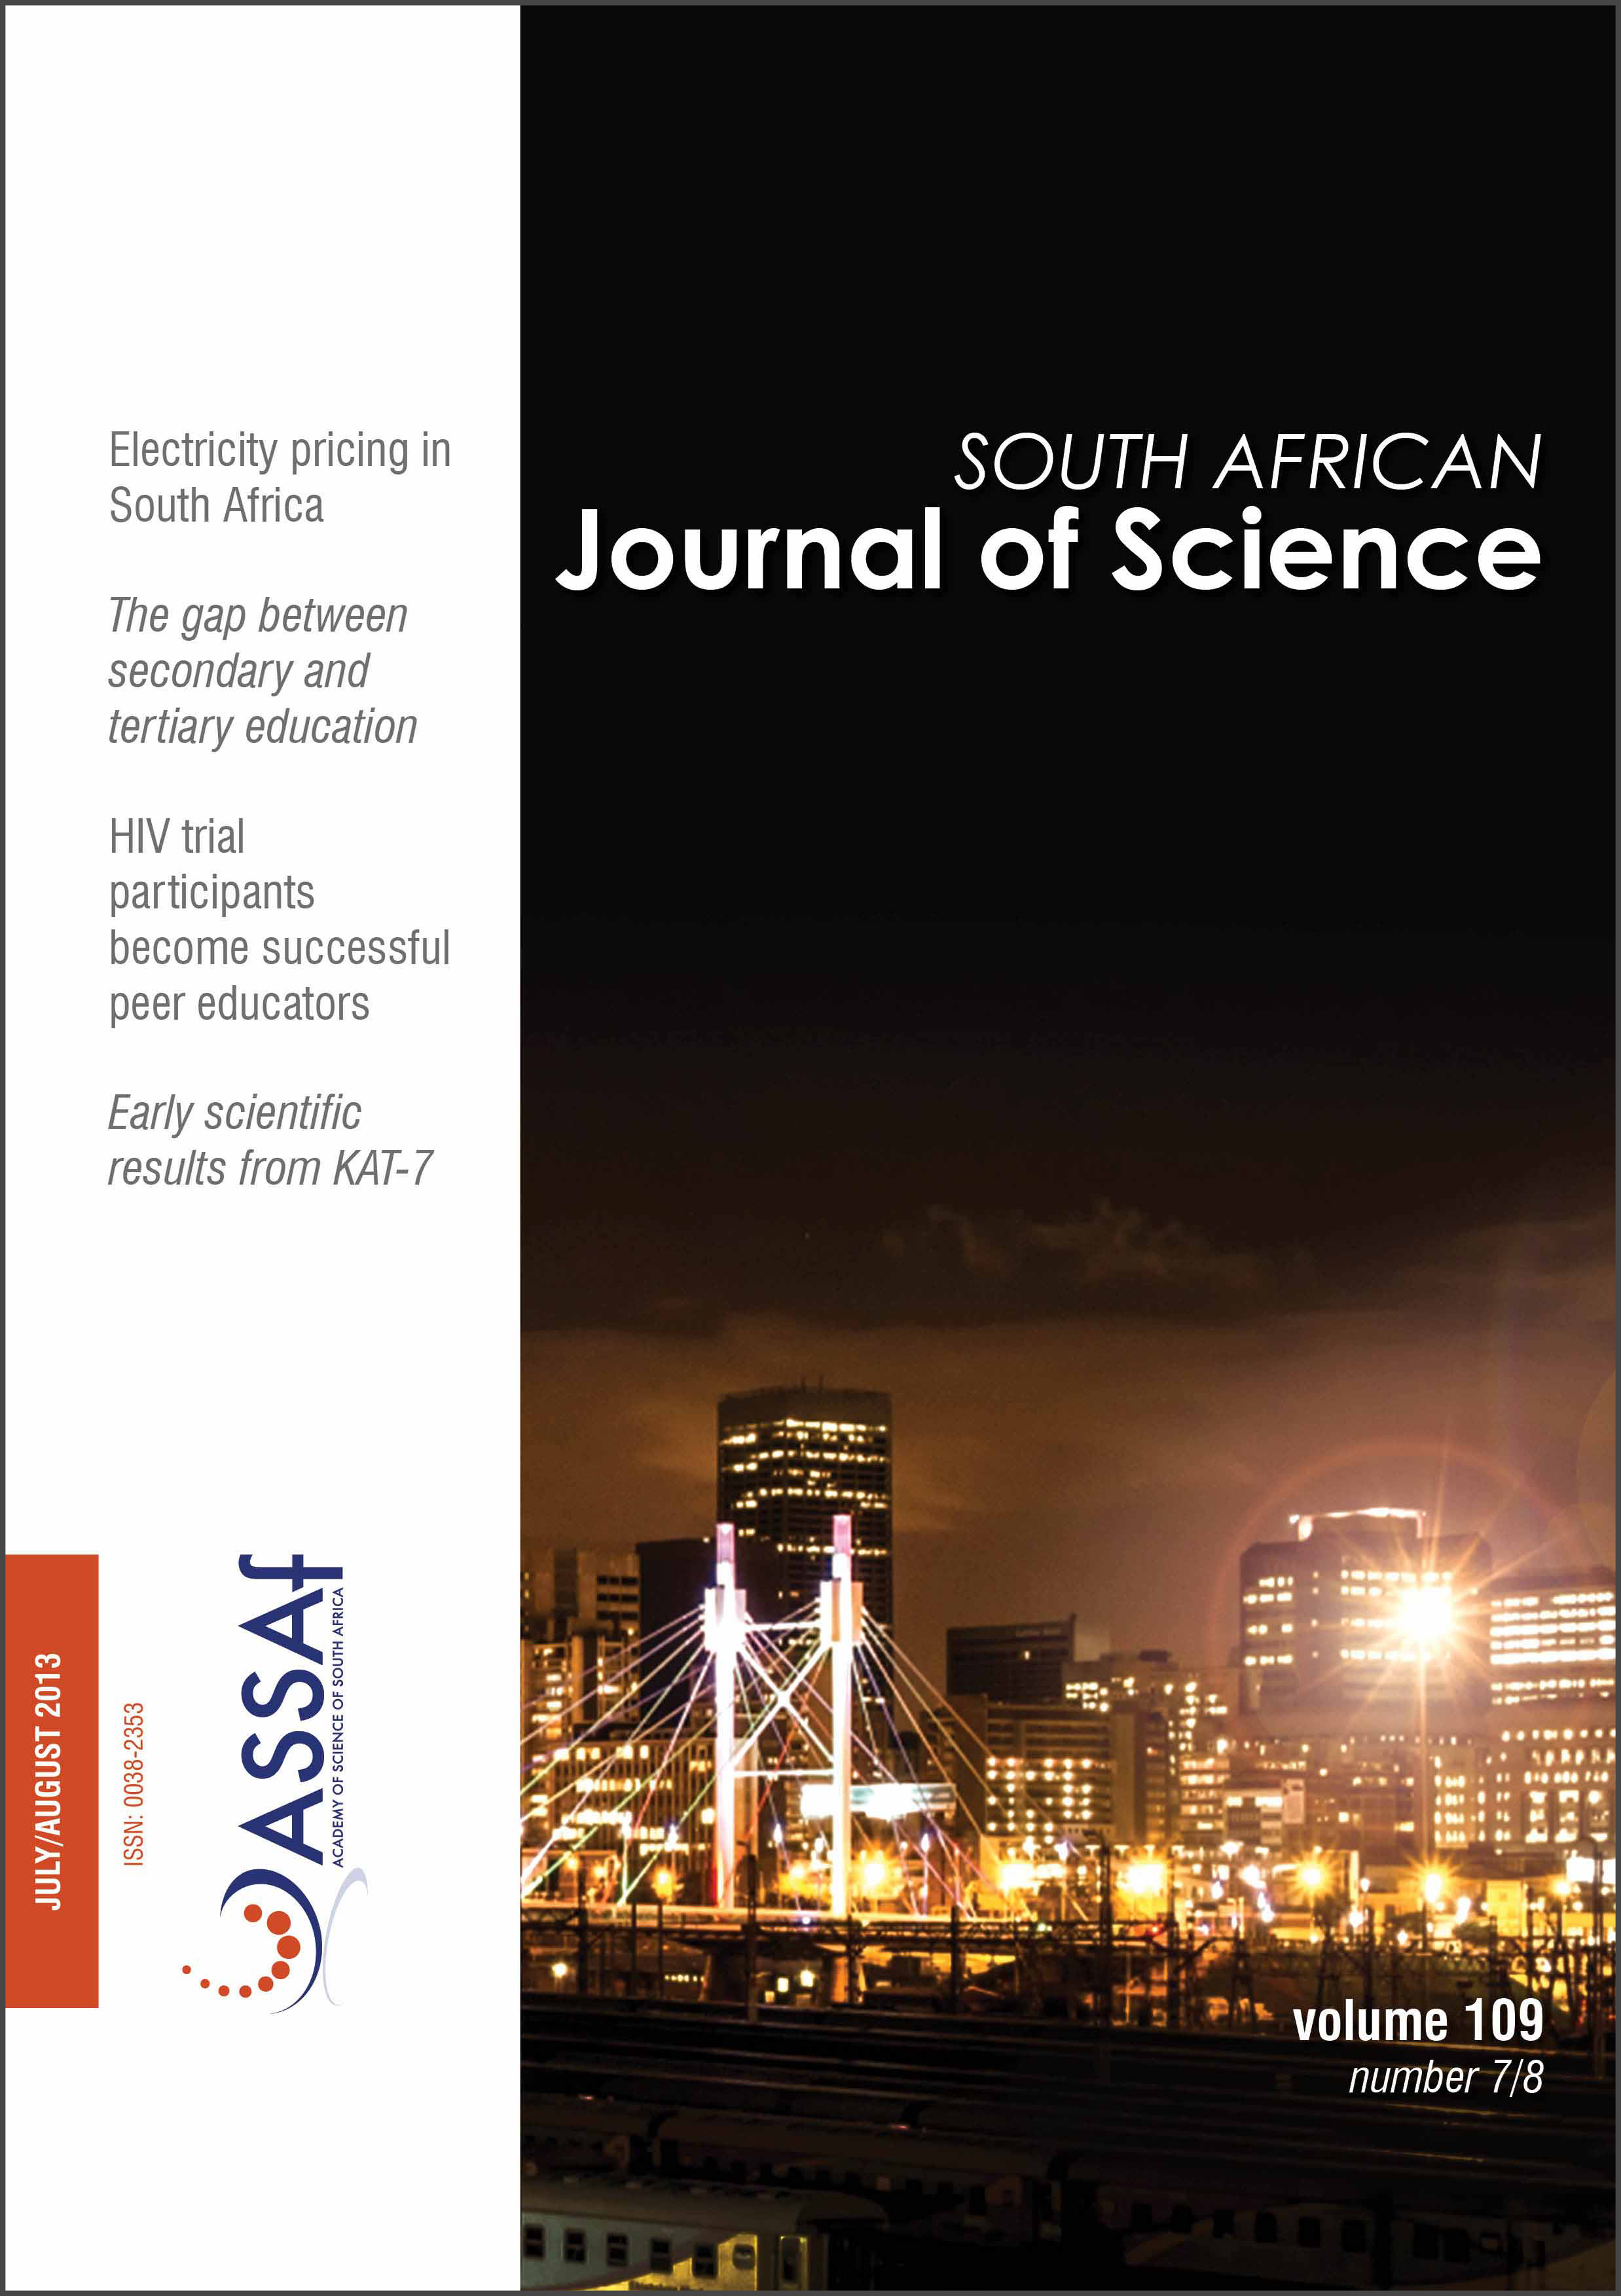 					View Vol. 109 No. 7/8 (2013): South African Journal of Science
				